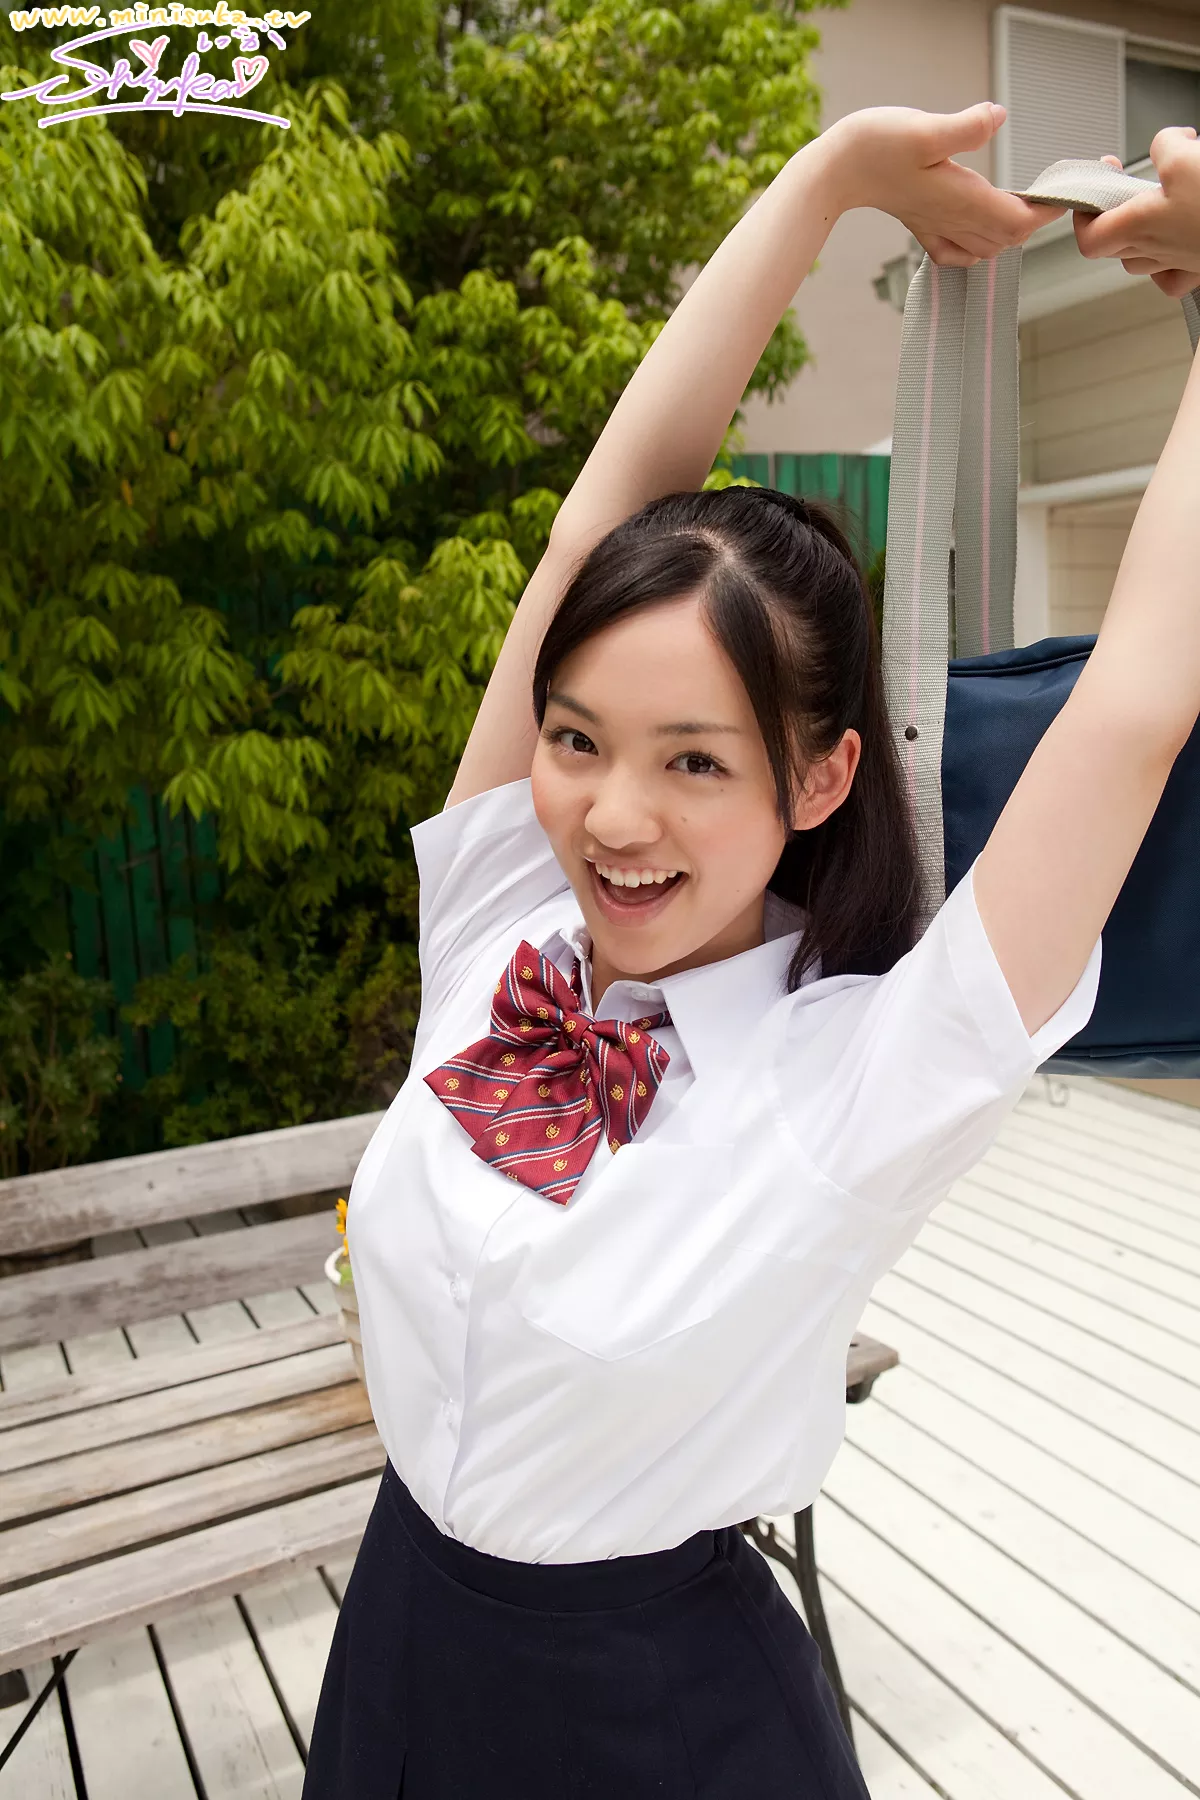 Minisuka.tv Special Gallery しづか